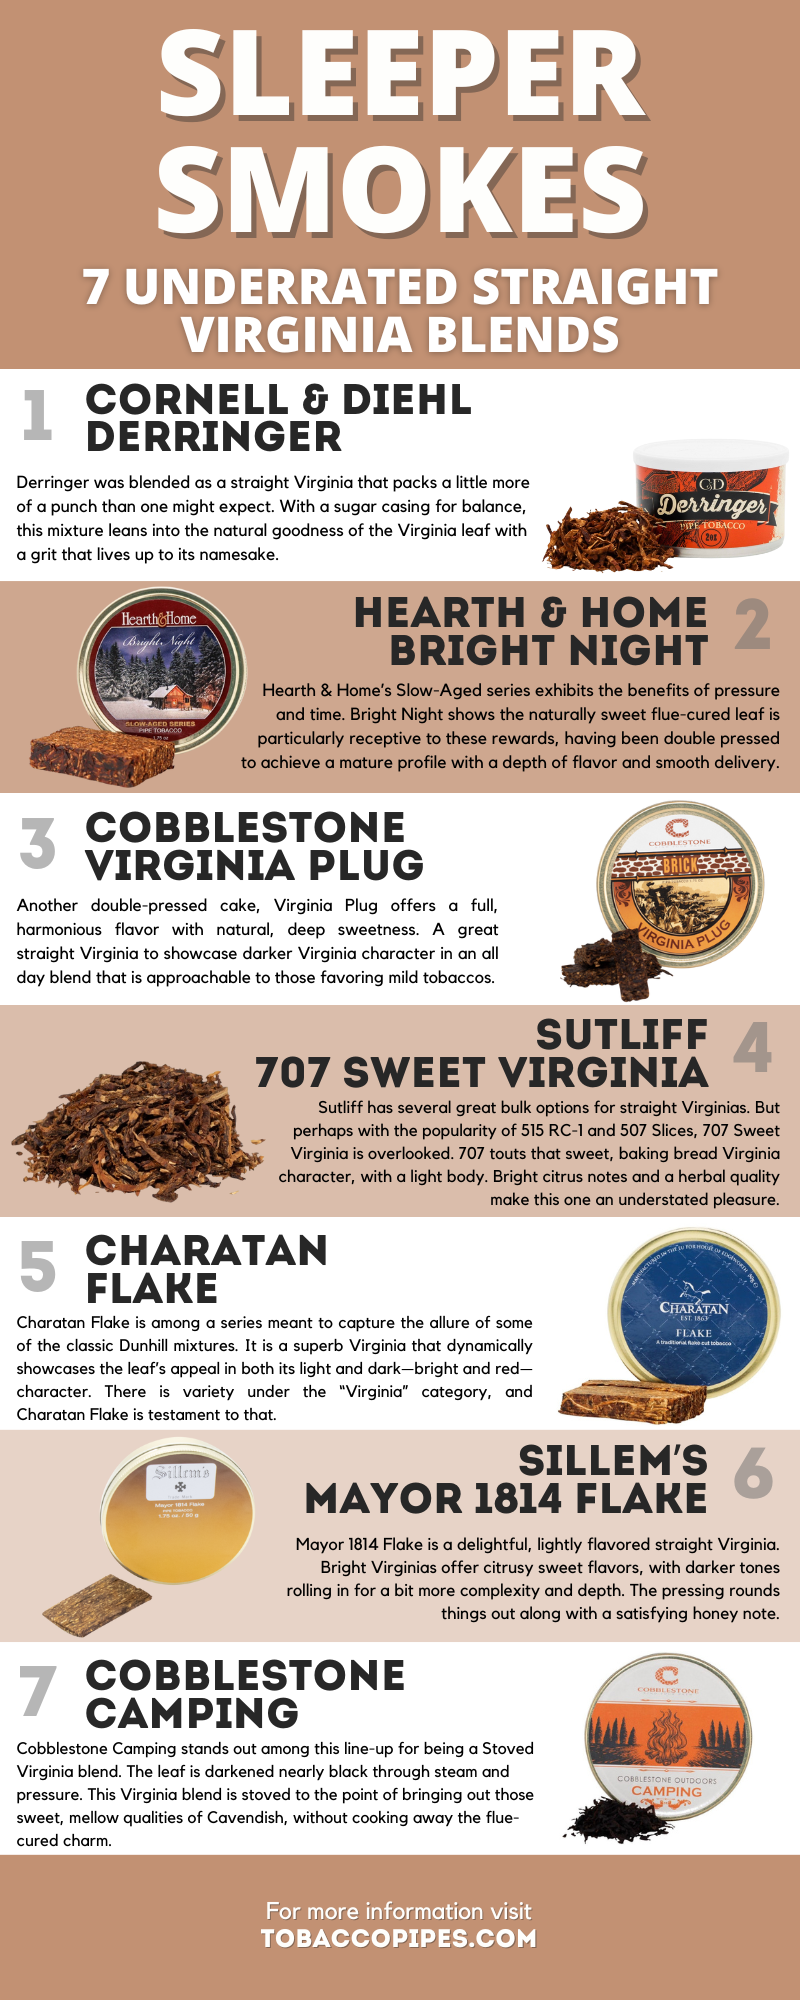 Underrated Straight Virginia tobacco blends